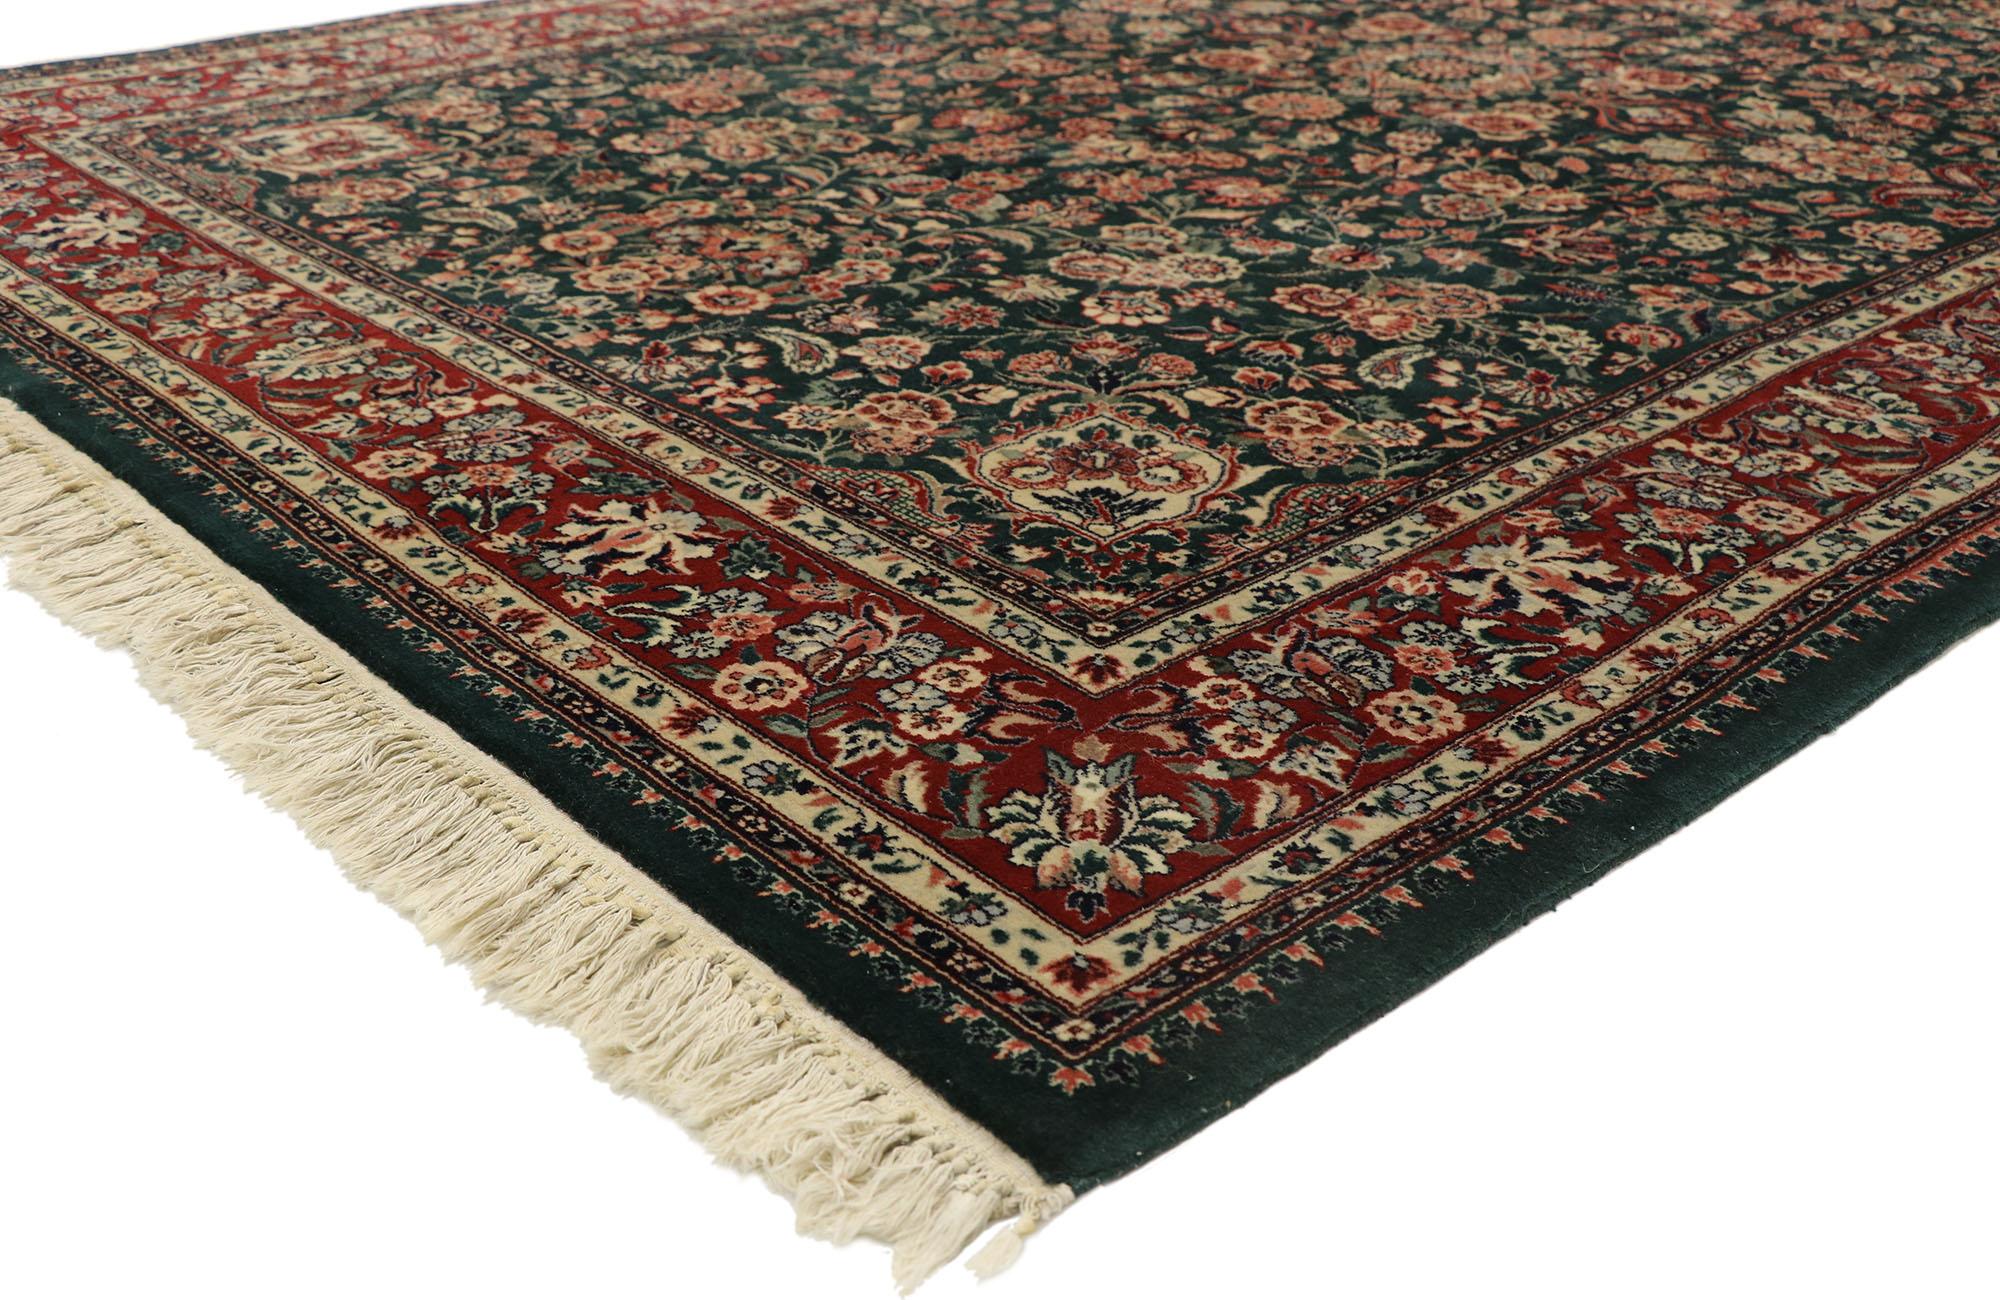 77416 Vintage Chinese Area Rug with Persian Tabriz Design and Regency Style 05'10 x 09'00. Ravishing and refined, this hand knotted wool vintage Chinese Tabriz Persian style rug features an all-over botanical garden scene composed of blooming